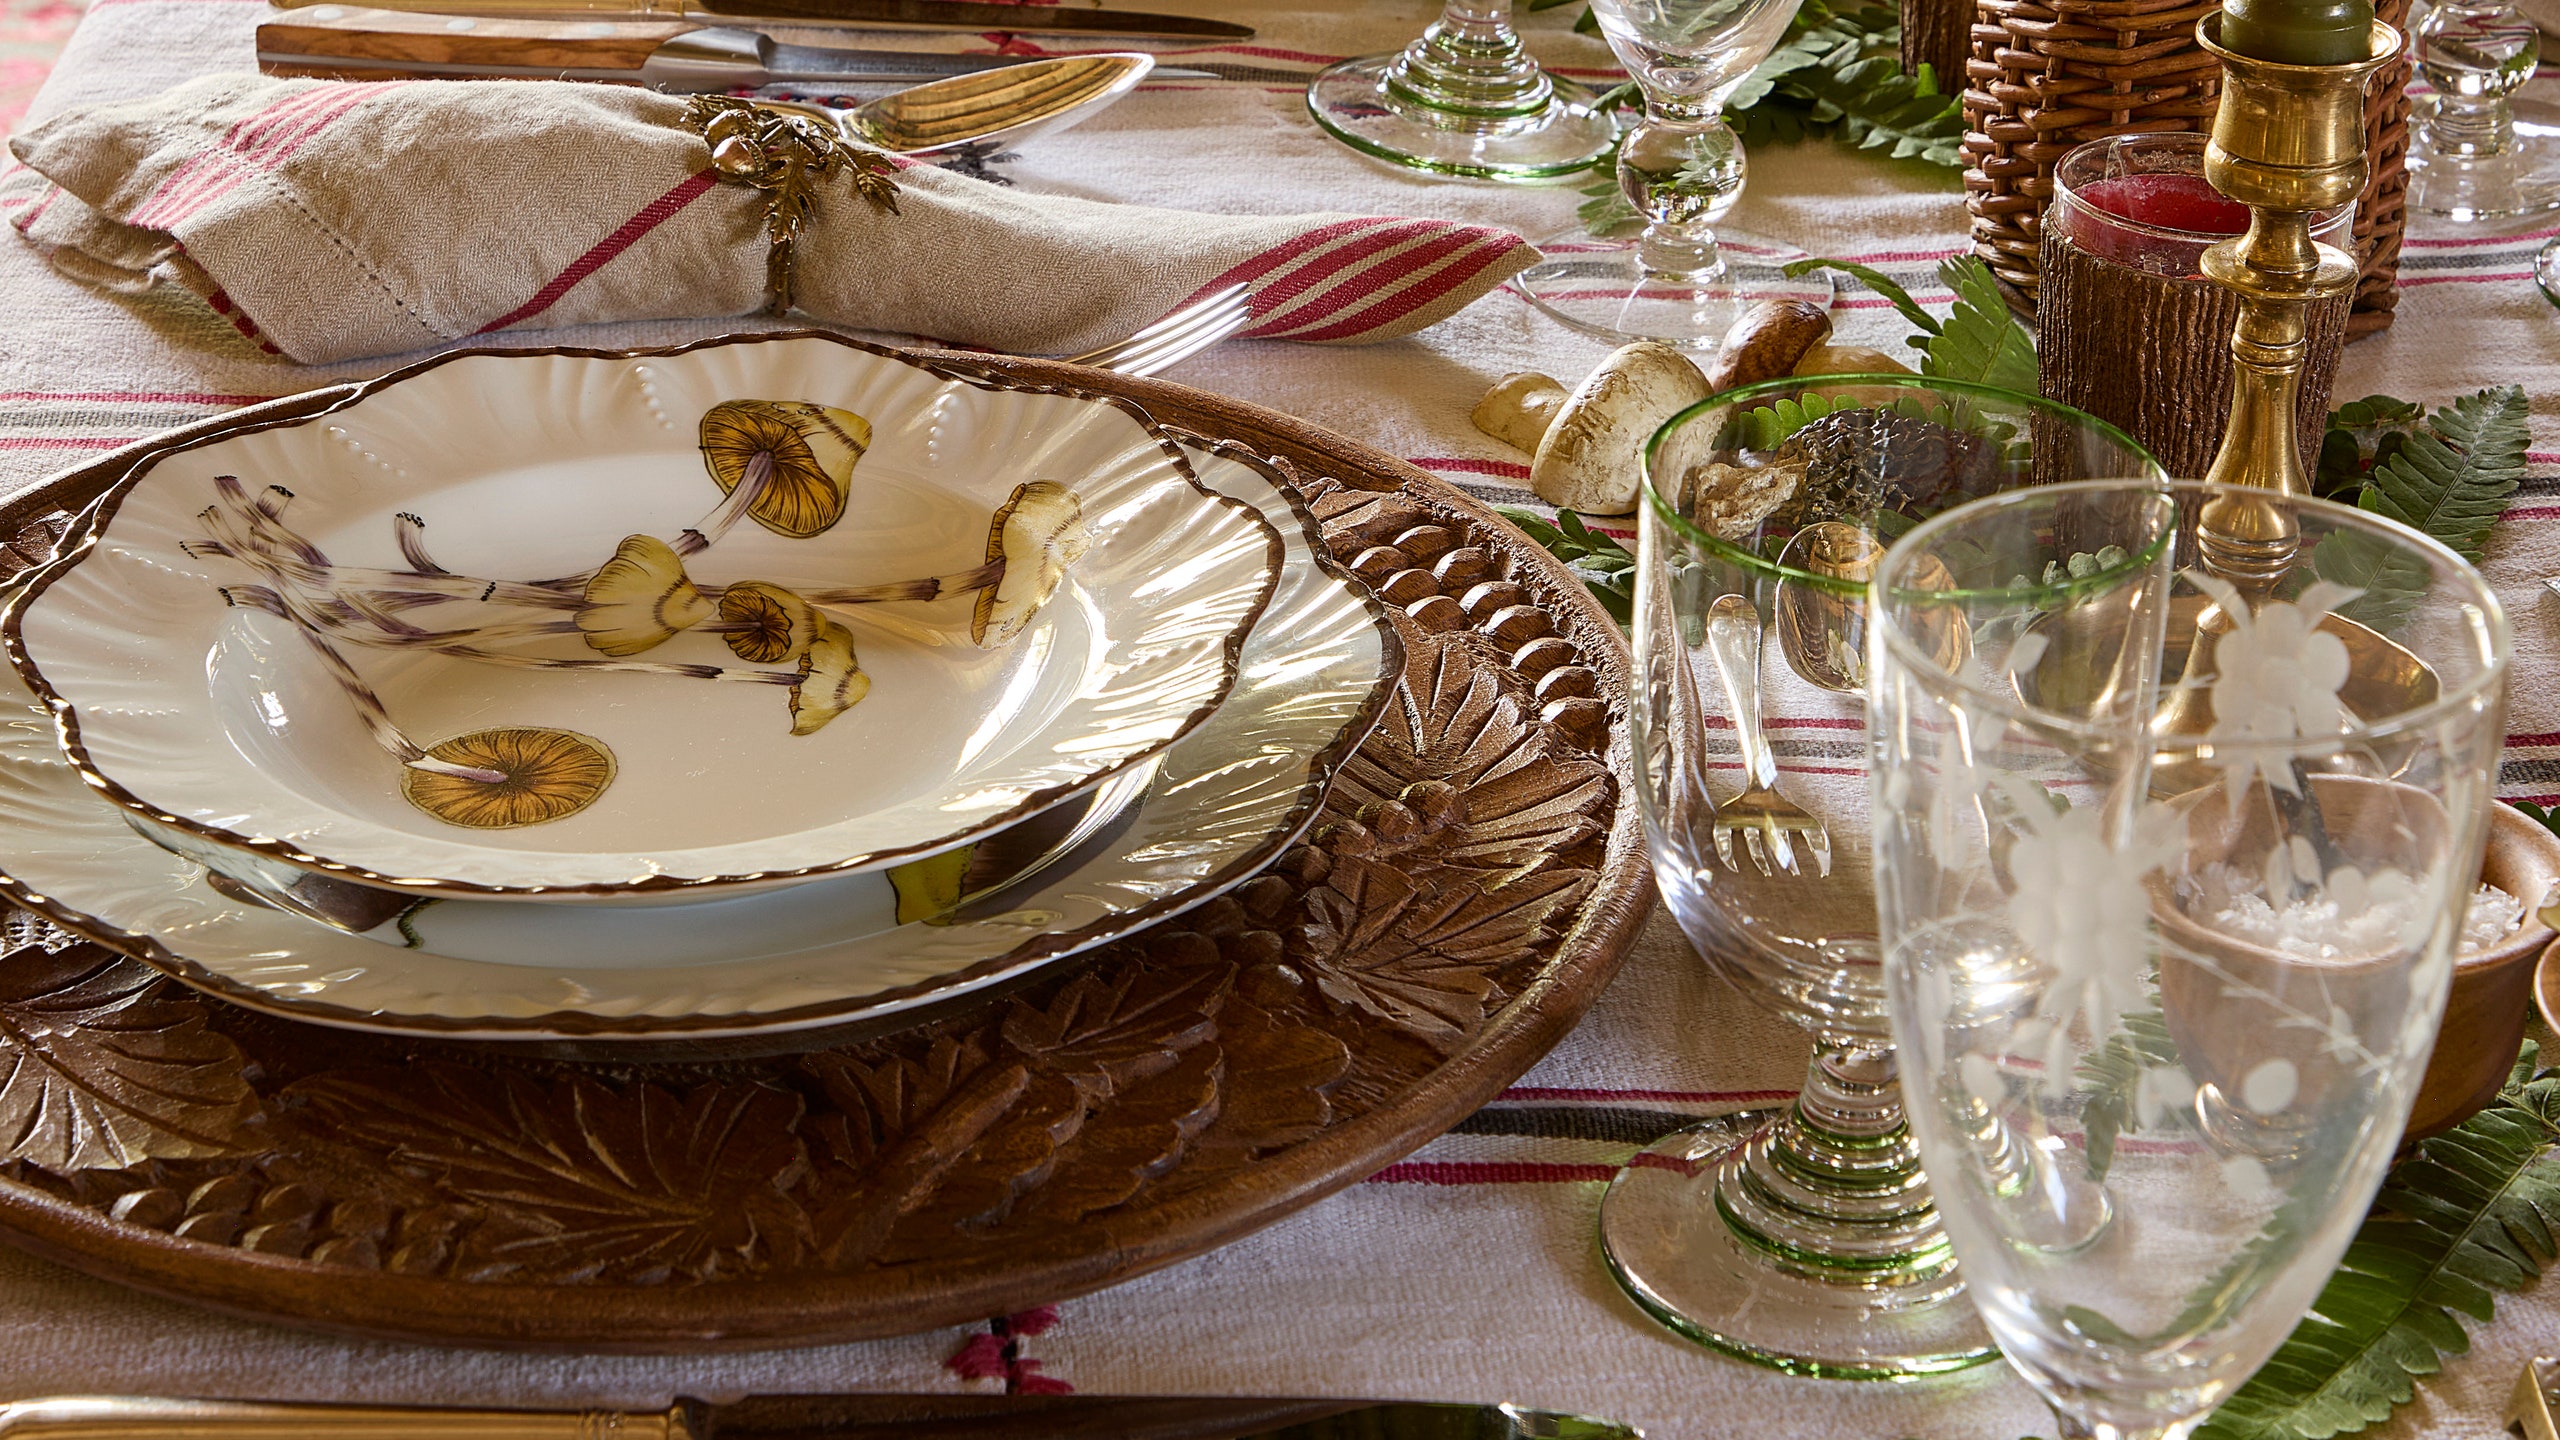 A Wisconsin table set with mushroom plates by Alberto Pinto on a vintage French linen tablecloth.